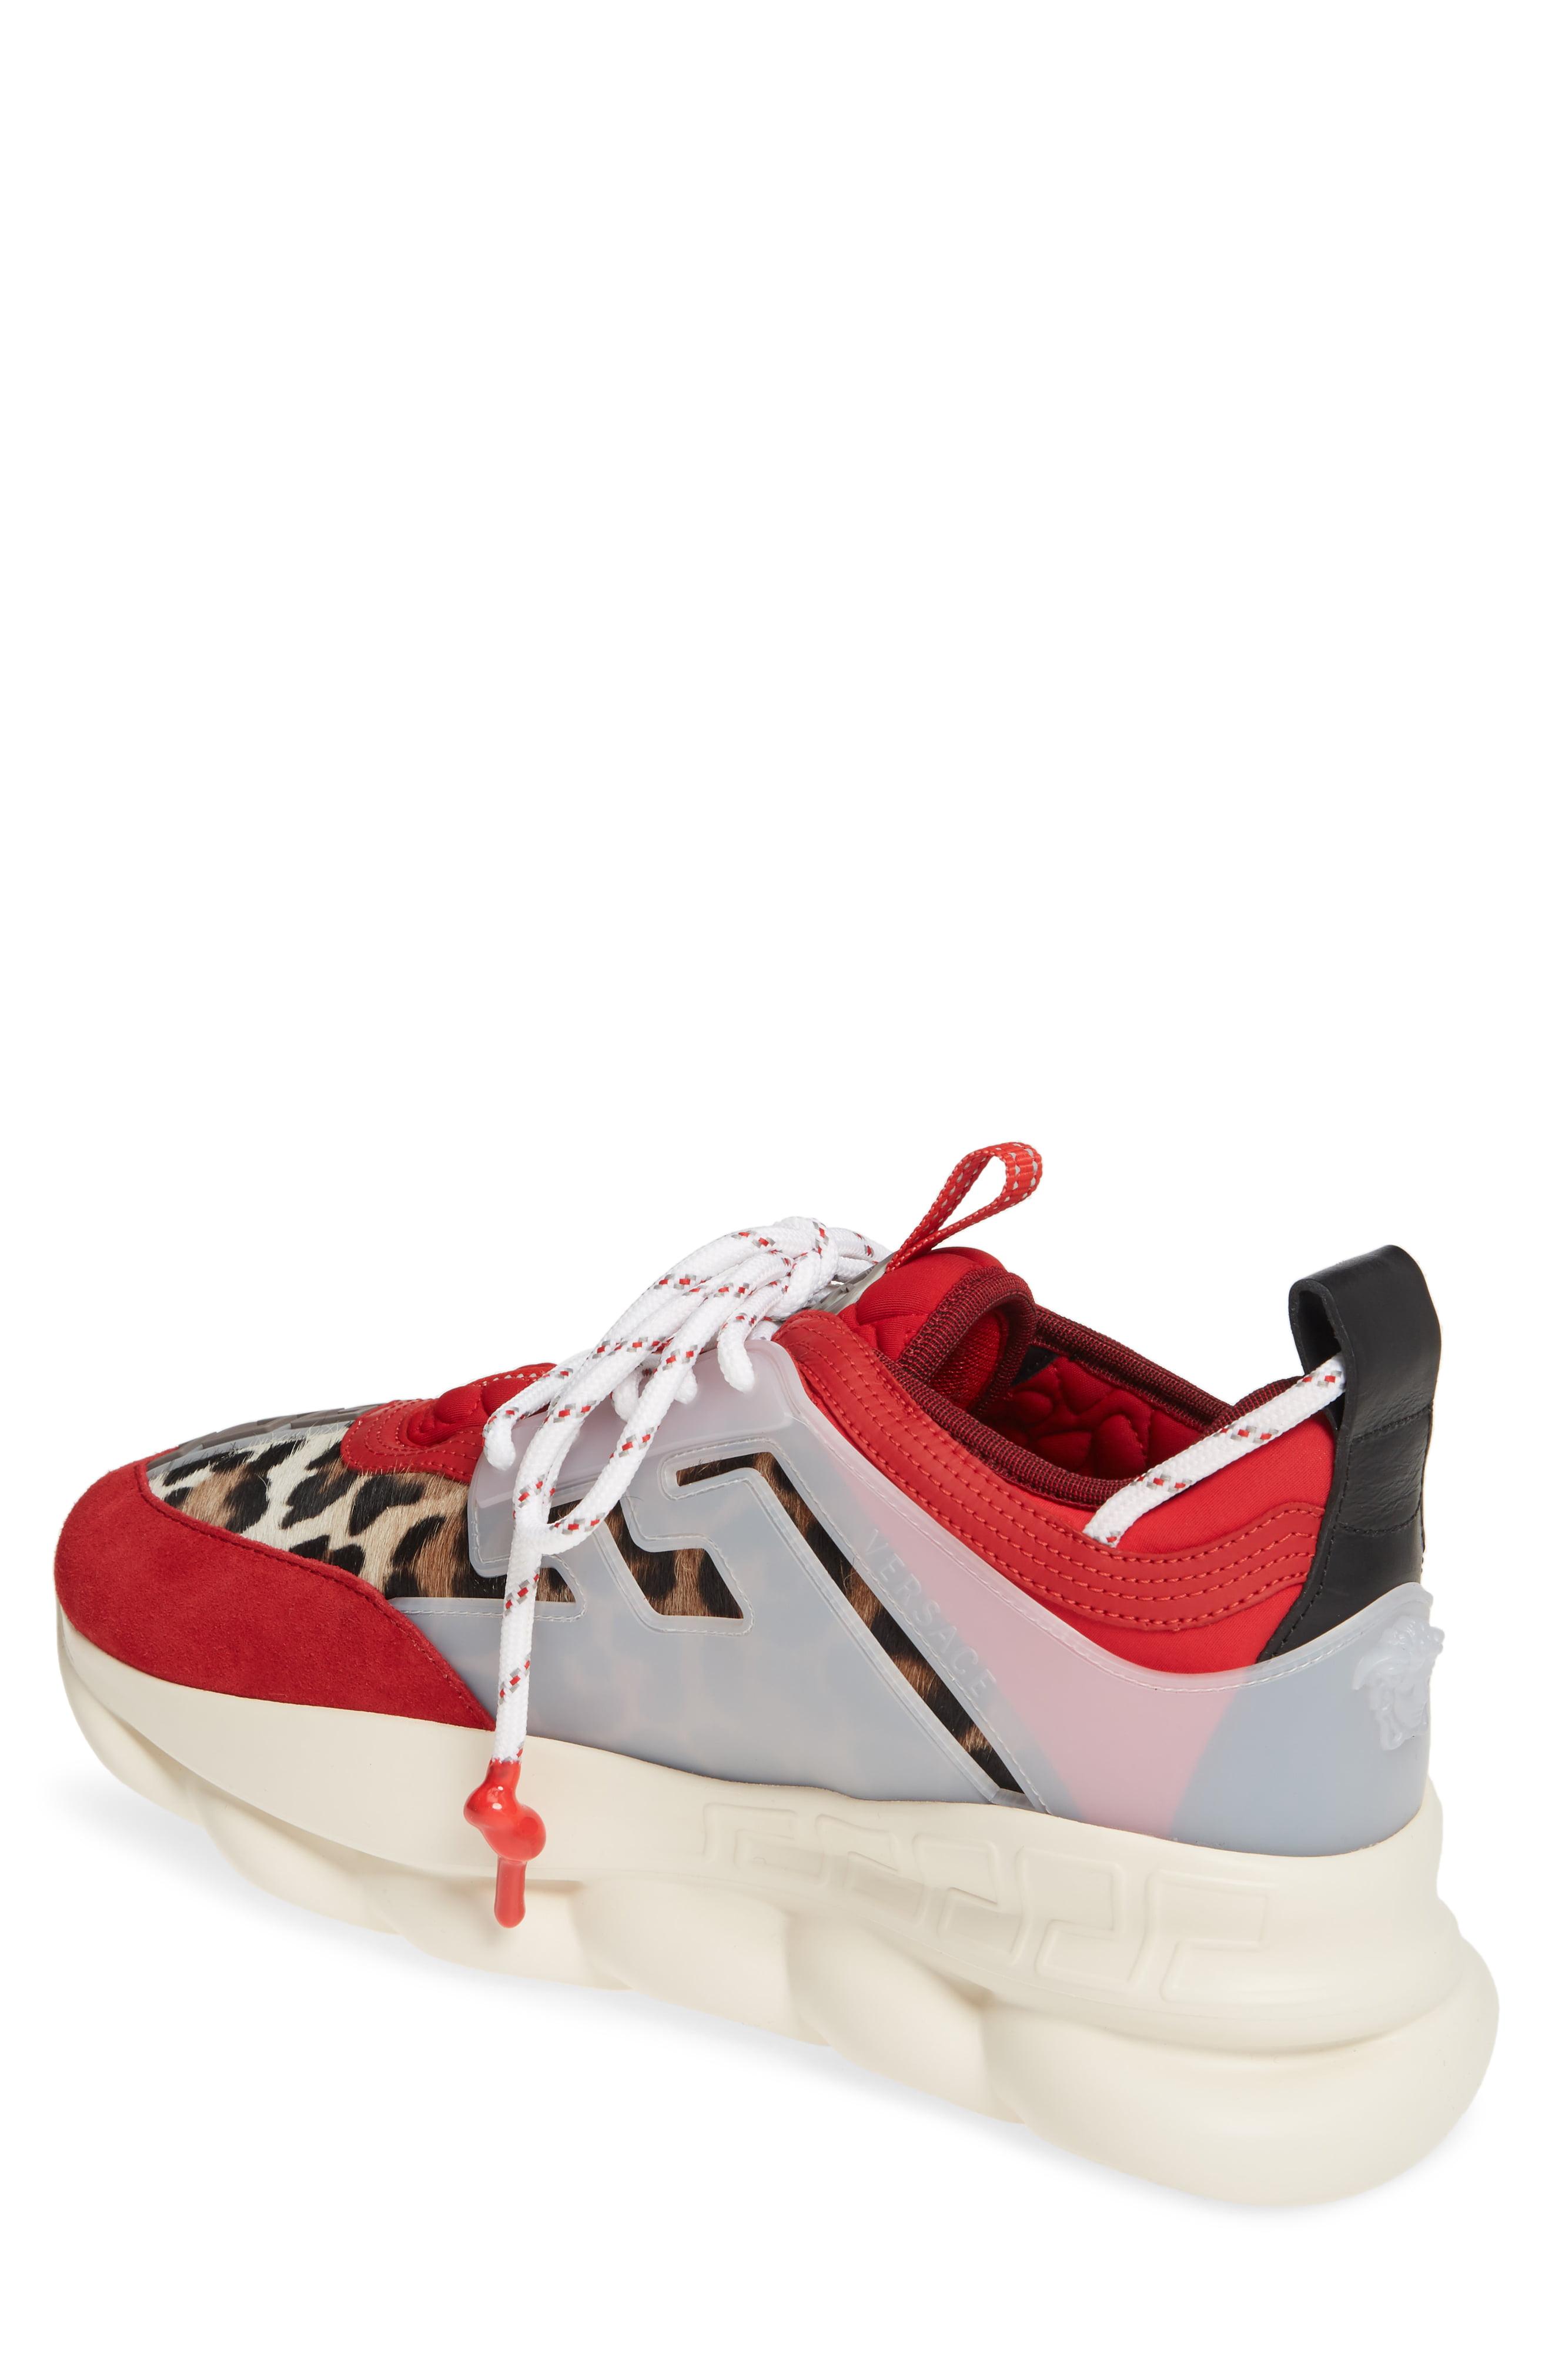 Versace Neoprene Chain Reaction Trainers in Red for Men - Save 25% - Lyst